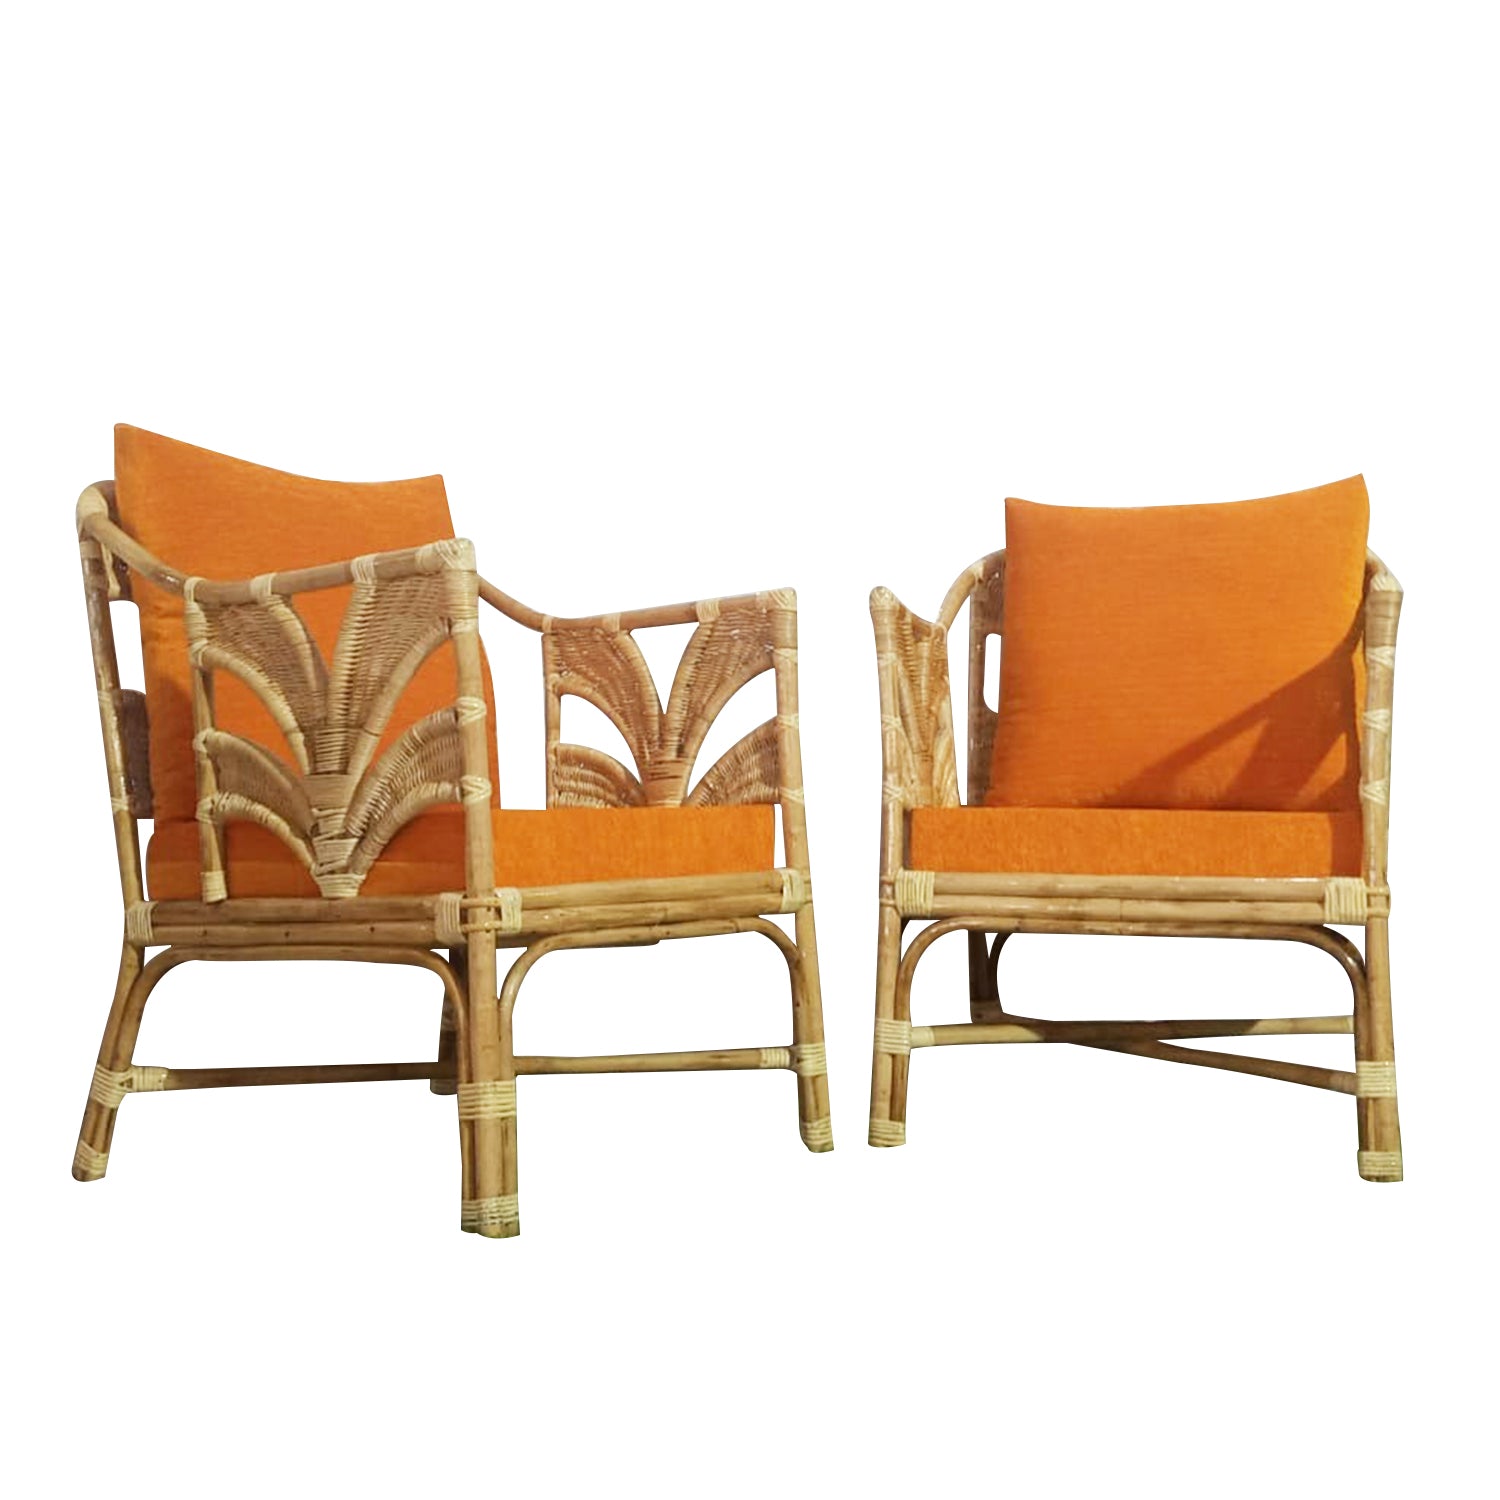 IRA Vintage Armchair Chairs